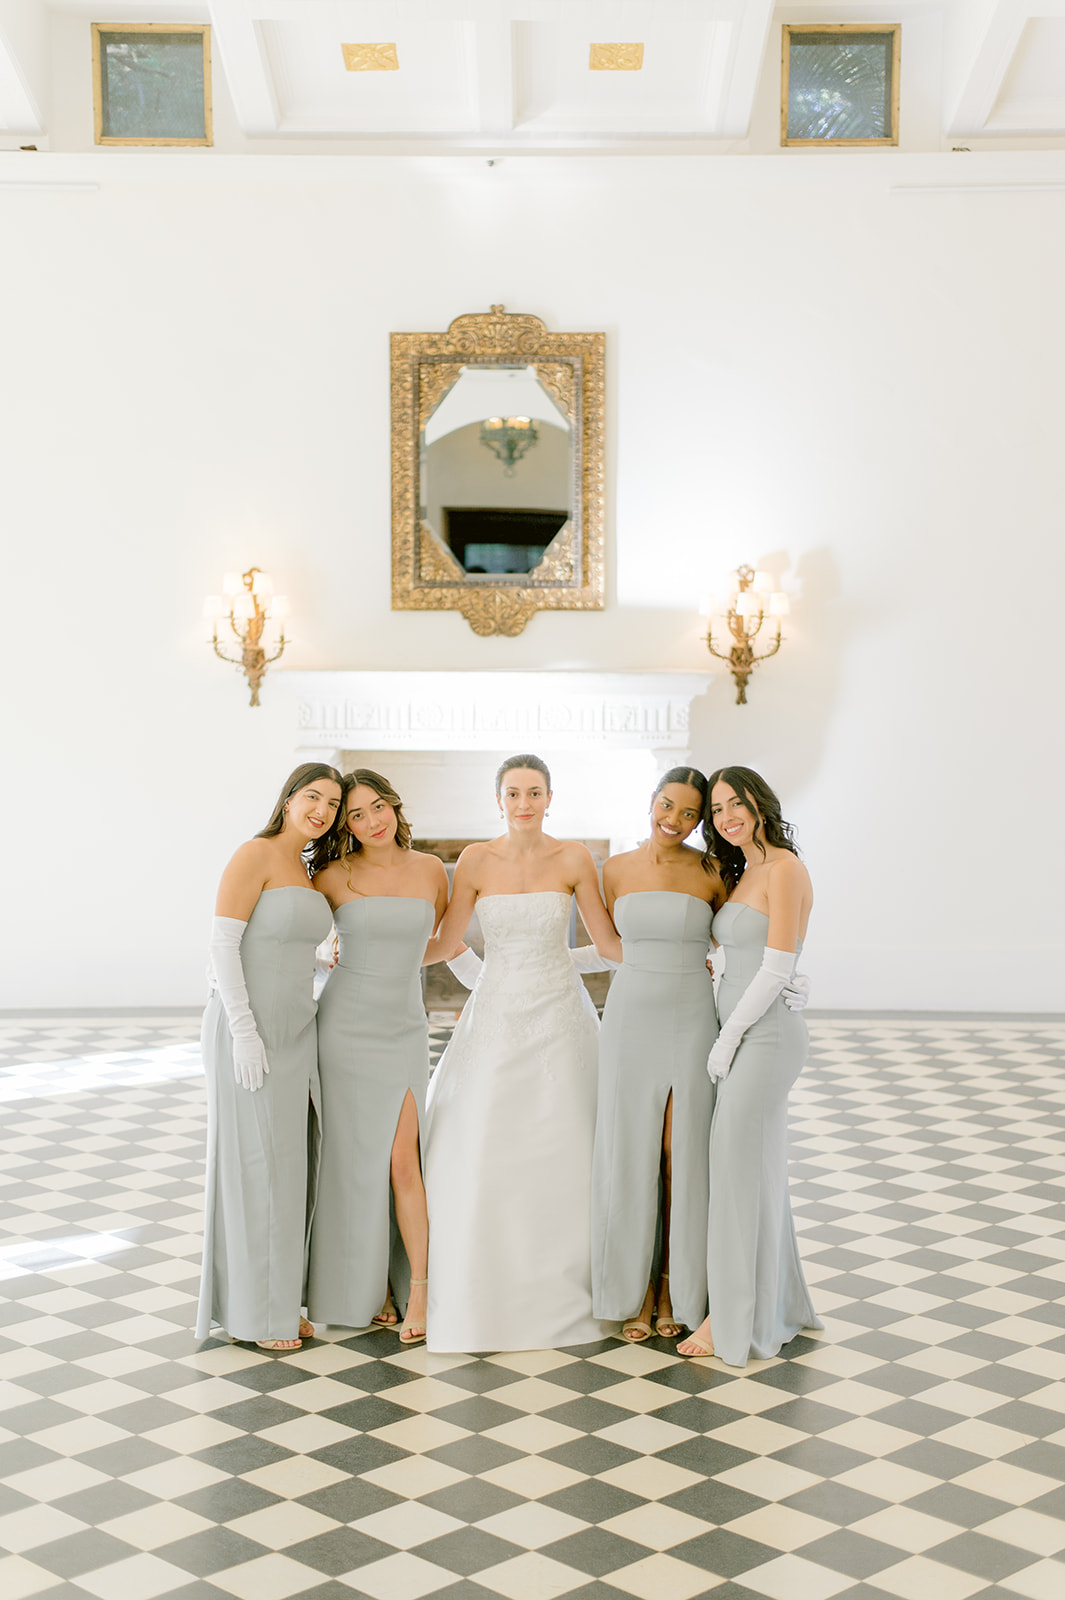 Miami Florida photographers who specialize in wedding photography
